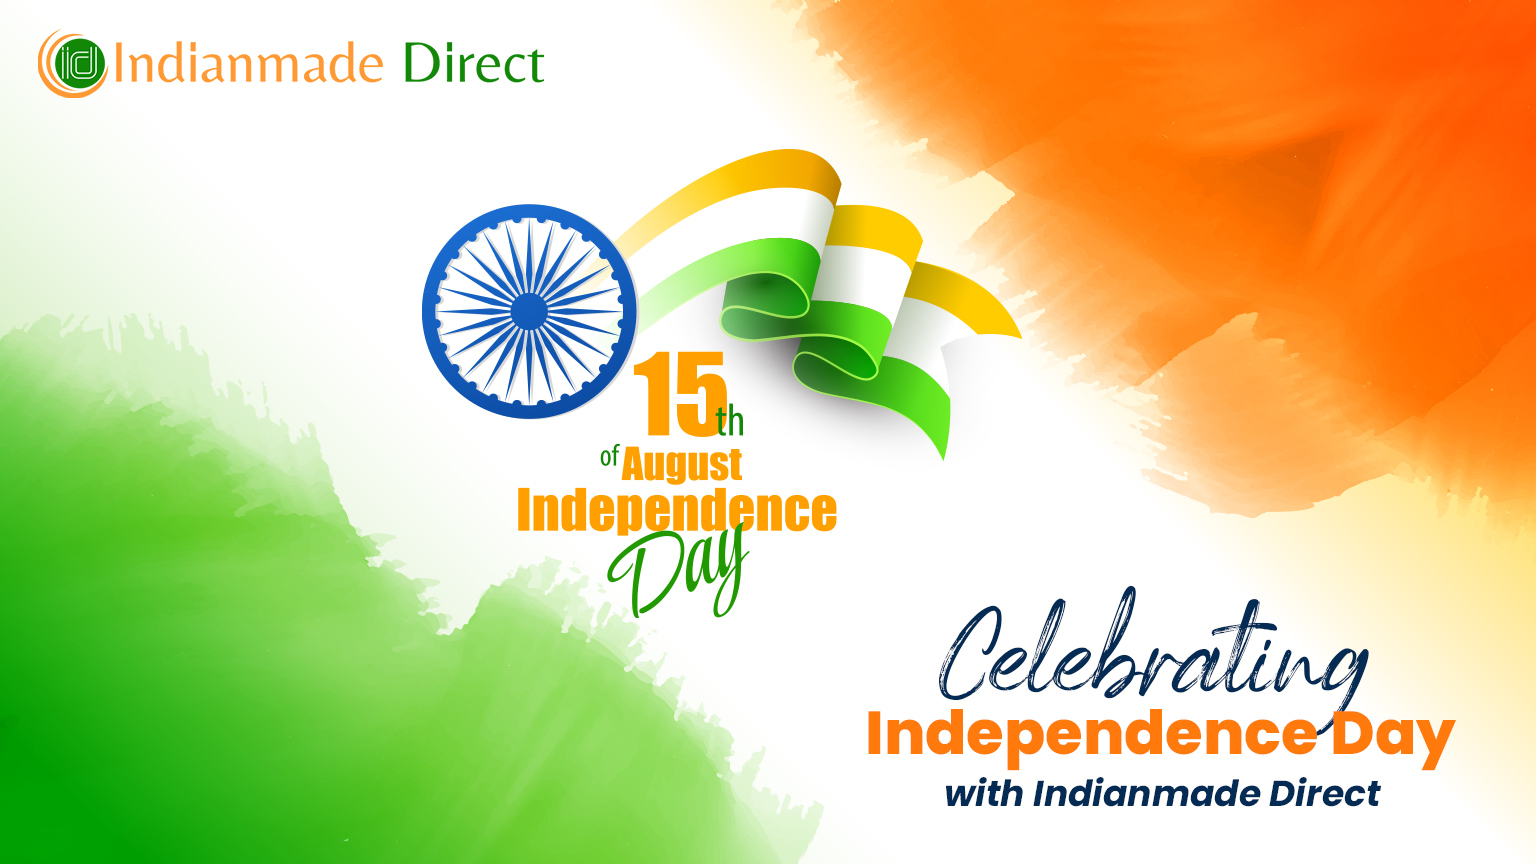 Celebrating Independence Day with Indianmade